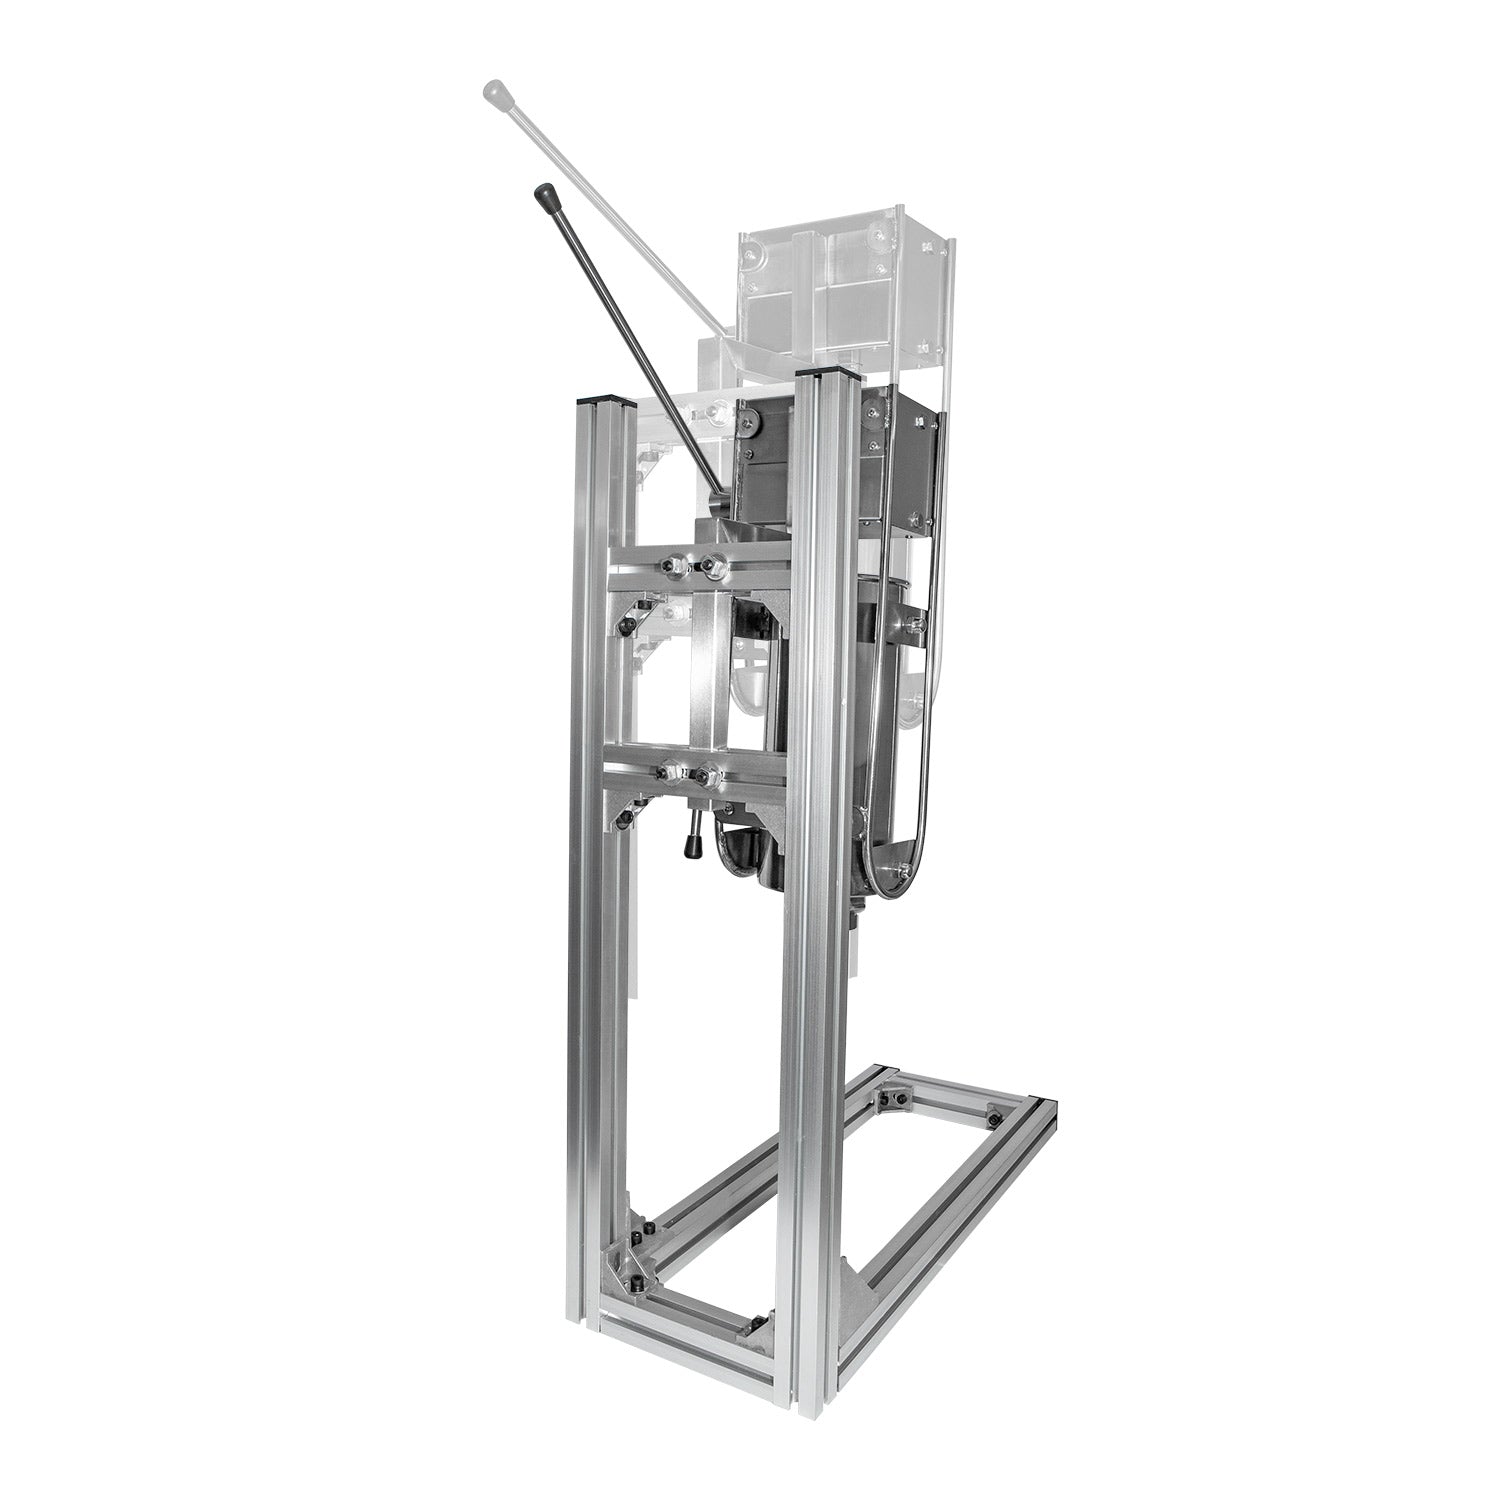 A-TG5LF Churros Machine | Manual Churro Maker | Working Stand | Deep Fryer | Stainless Steel | 5L Capacity